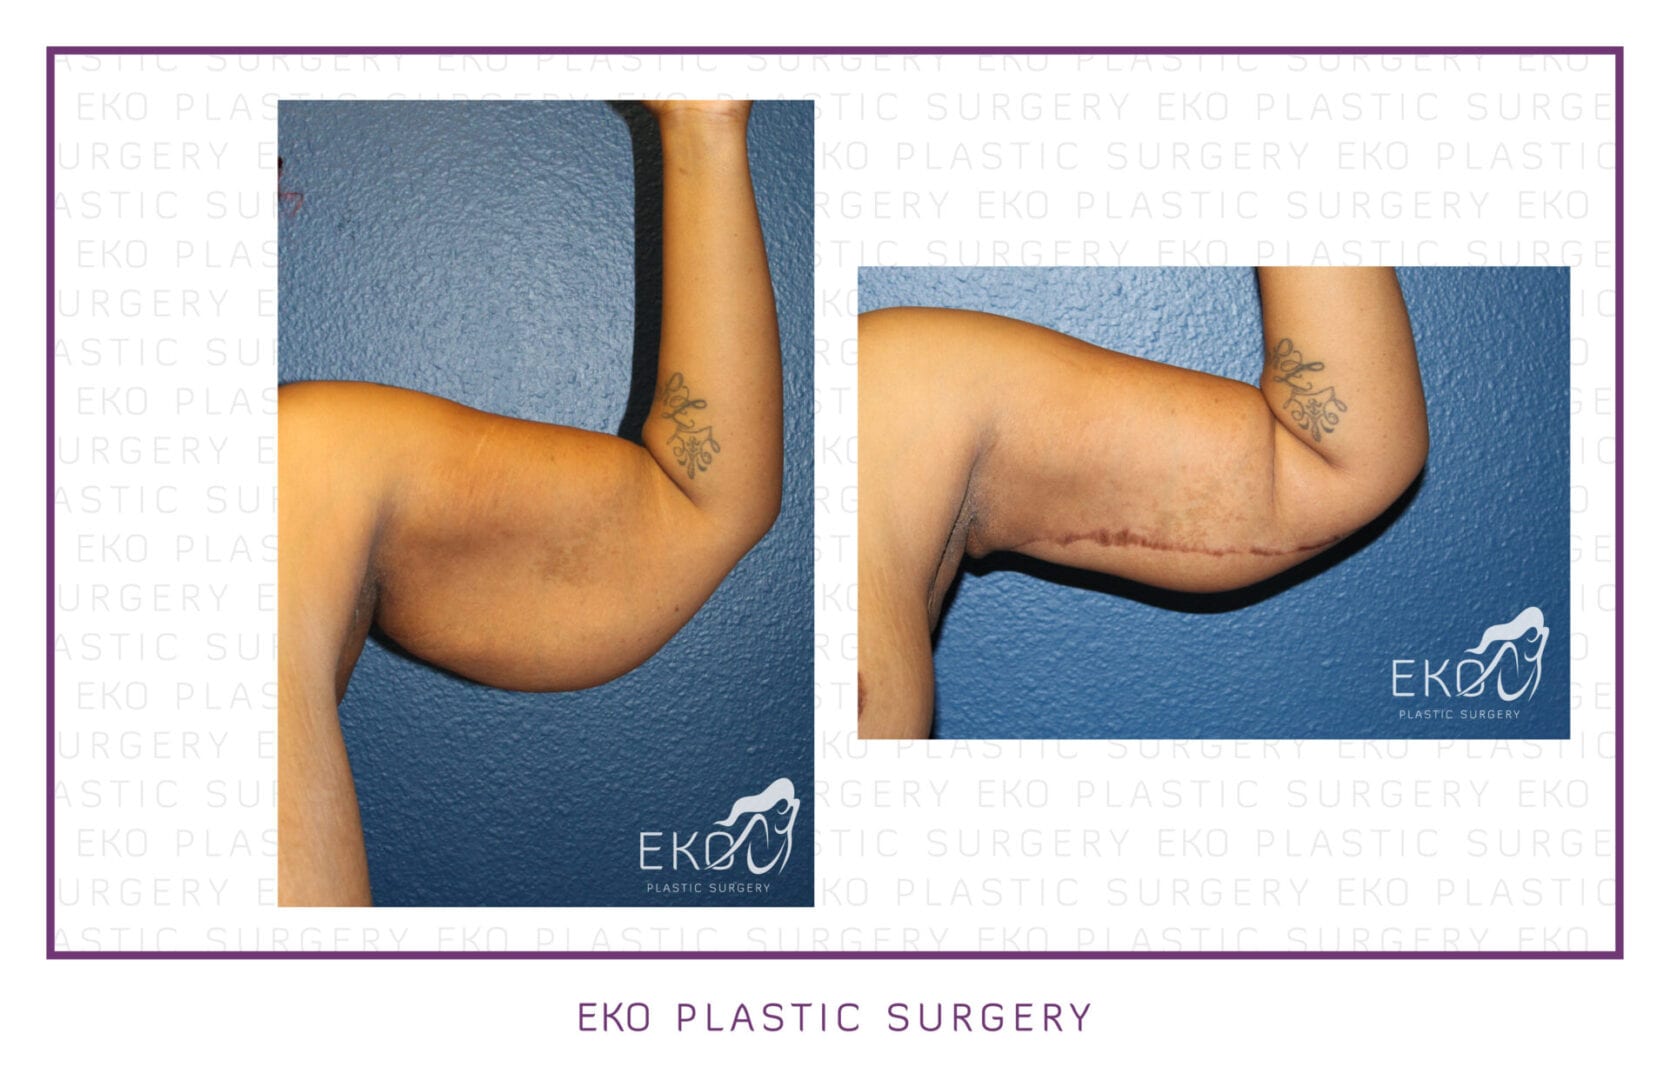 Arm Lift (Brachioplasty) Before and After Photo by Dr. Eko of Eko Plastic Surgery in Palm Desert, CA